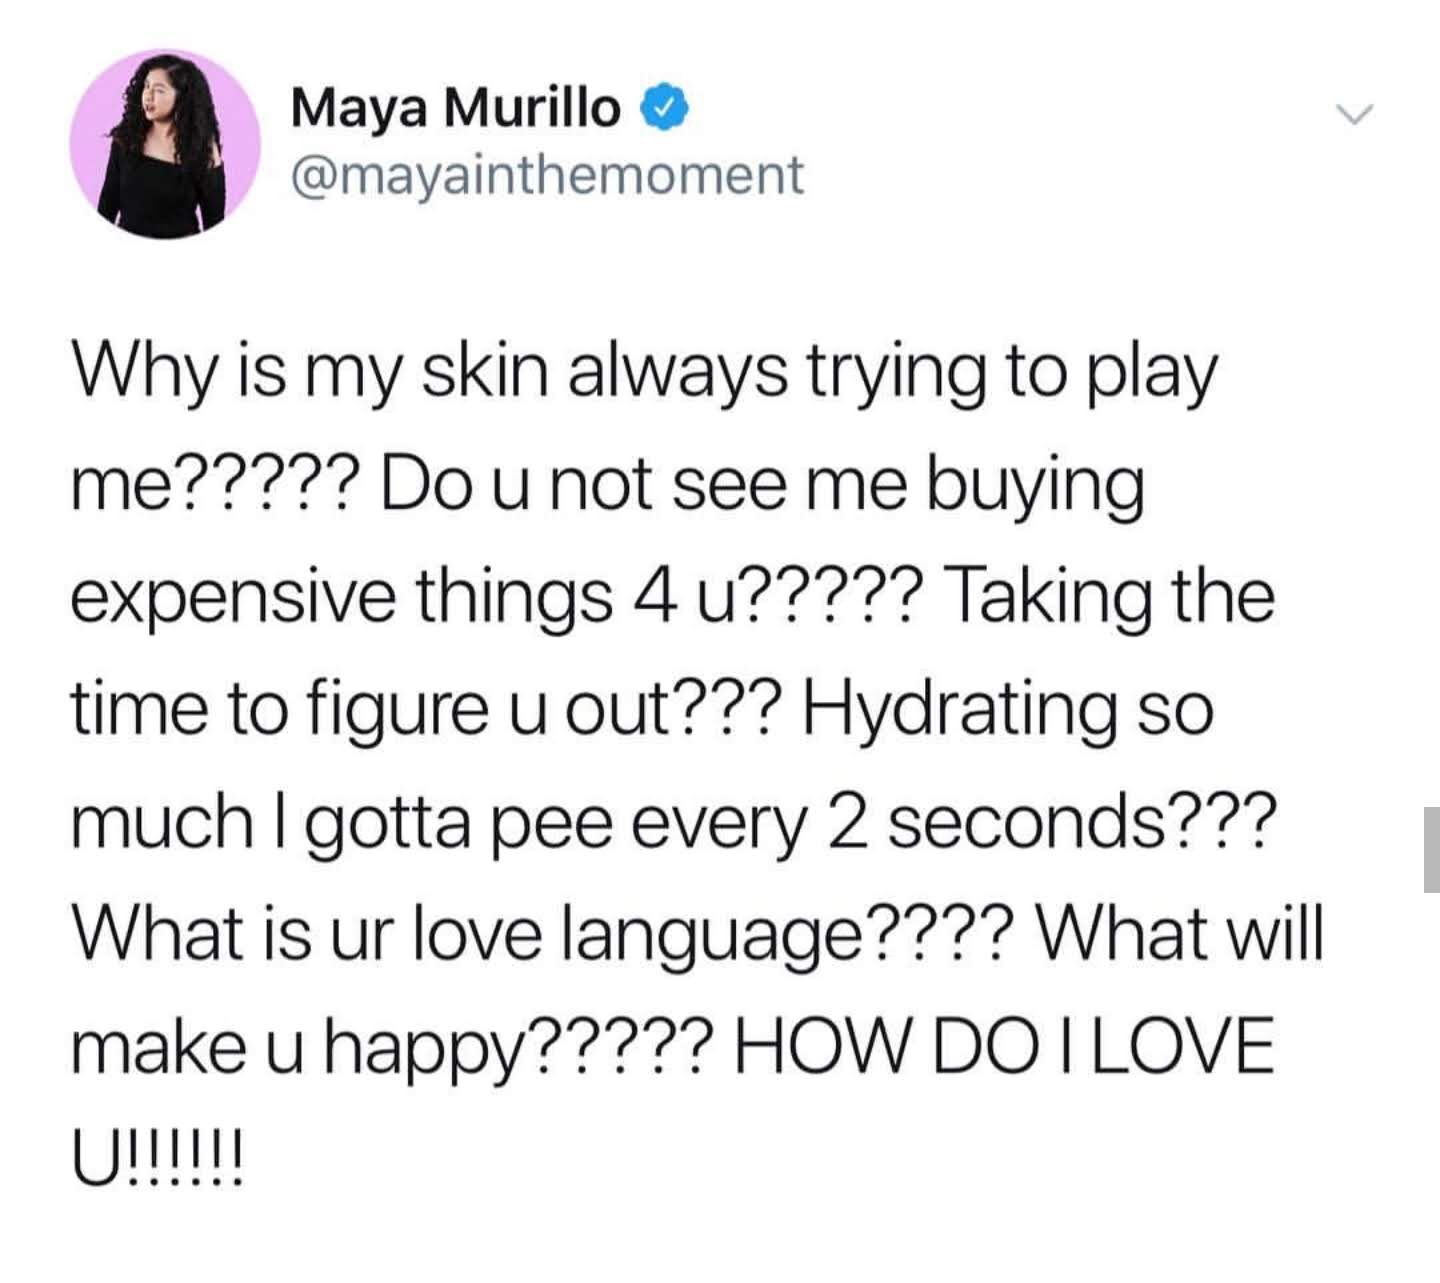 memes - boyfriend compliments - Maya Murillo Why is my skin always trying to play me????? Do u not see me buying expensive things 4 u????? Taking the time to figure u out??? Hydrating so much I gotta pee every 2 seconds??? What is ur love language???? Wha